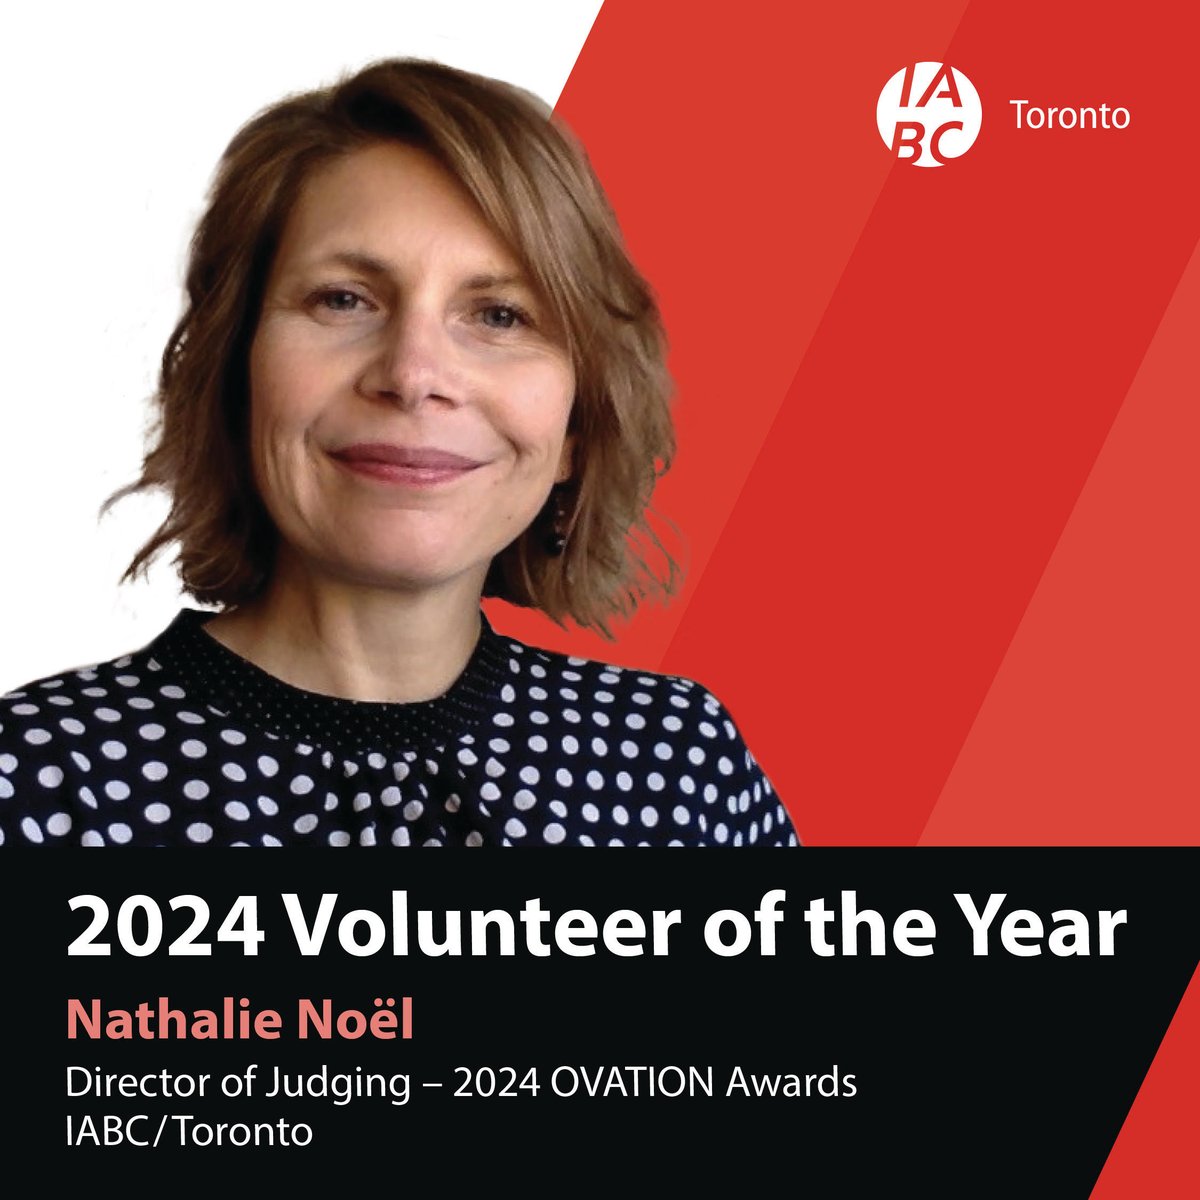 Nathalie Noël is IABC/Toronto's #VolunteerOfTheYear! From #branding to #marketing, her #leadership shines through. This year, she spearheaded the #OVATION24 judging process, ensuring a seamless experience for all. Join us in congratulating Nathalie!
#IABC #IABCTO #Communications